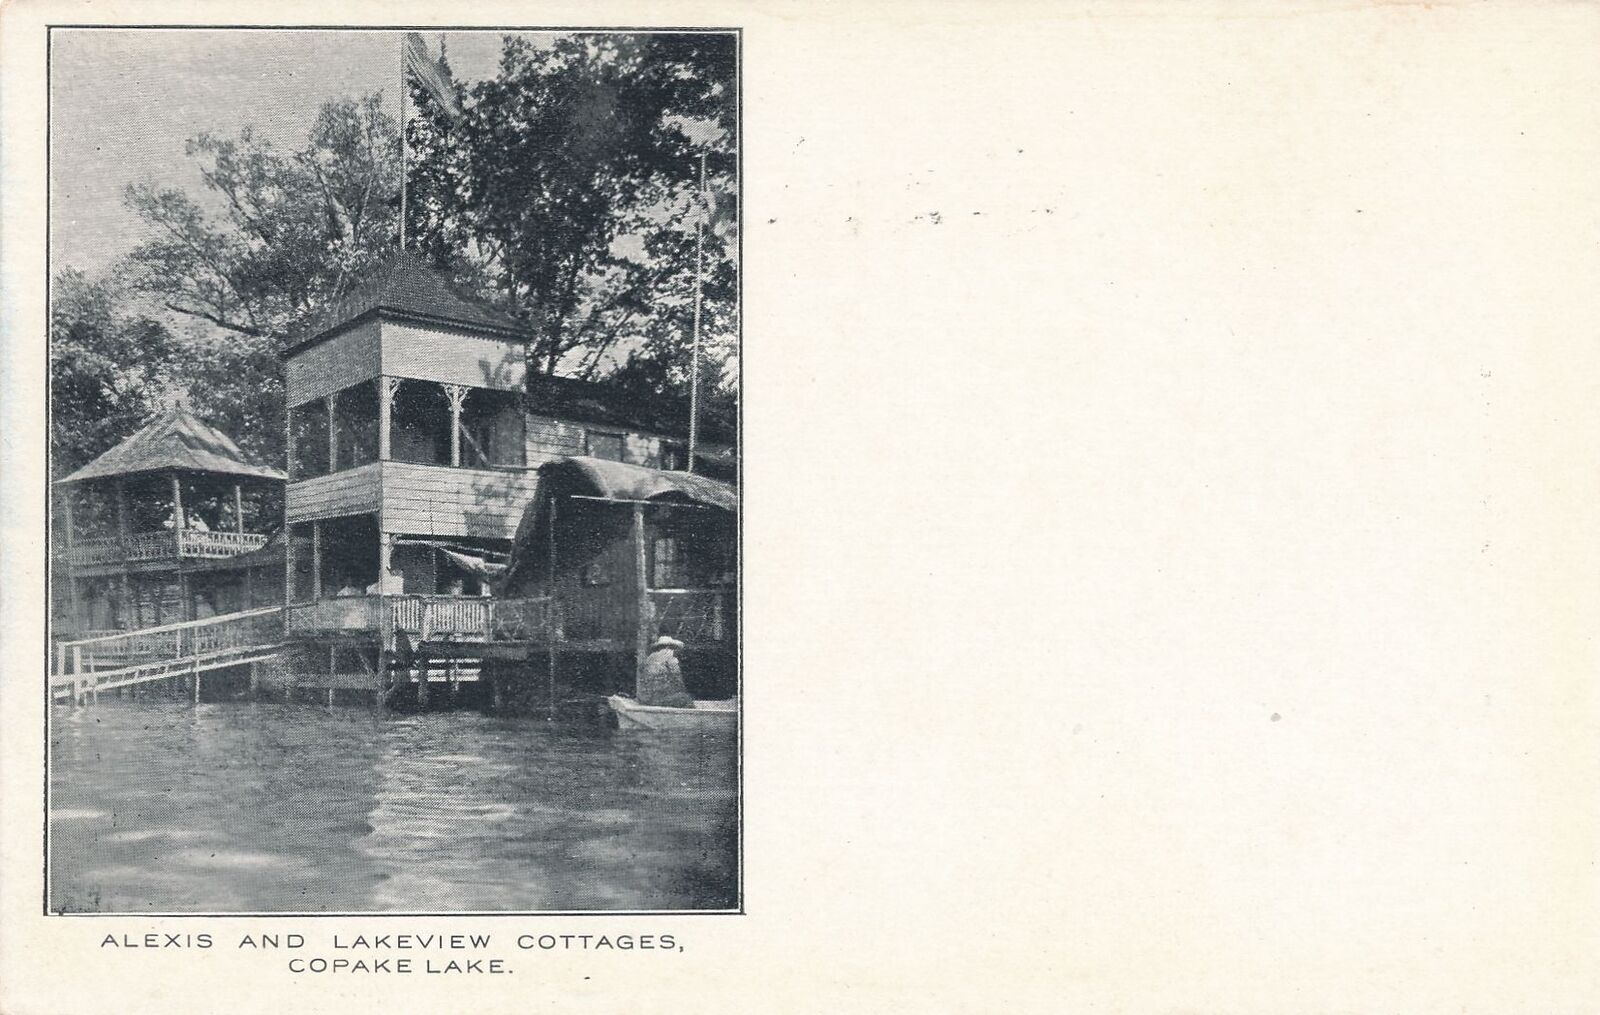 COPAKE LAKE NY - Alexis and Lakeview Cottages Postcard - udb (pre 1908)